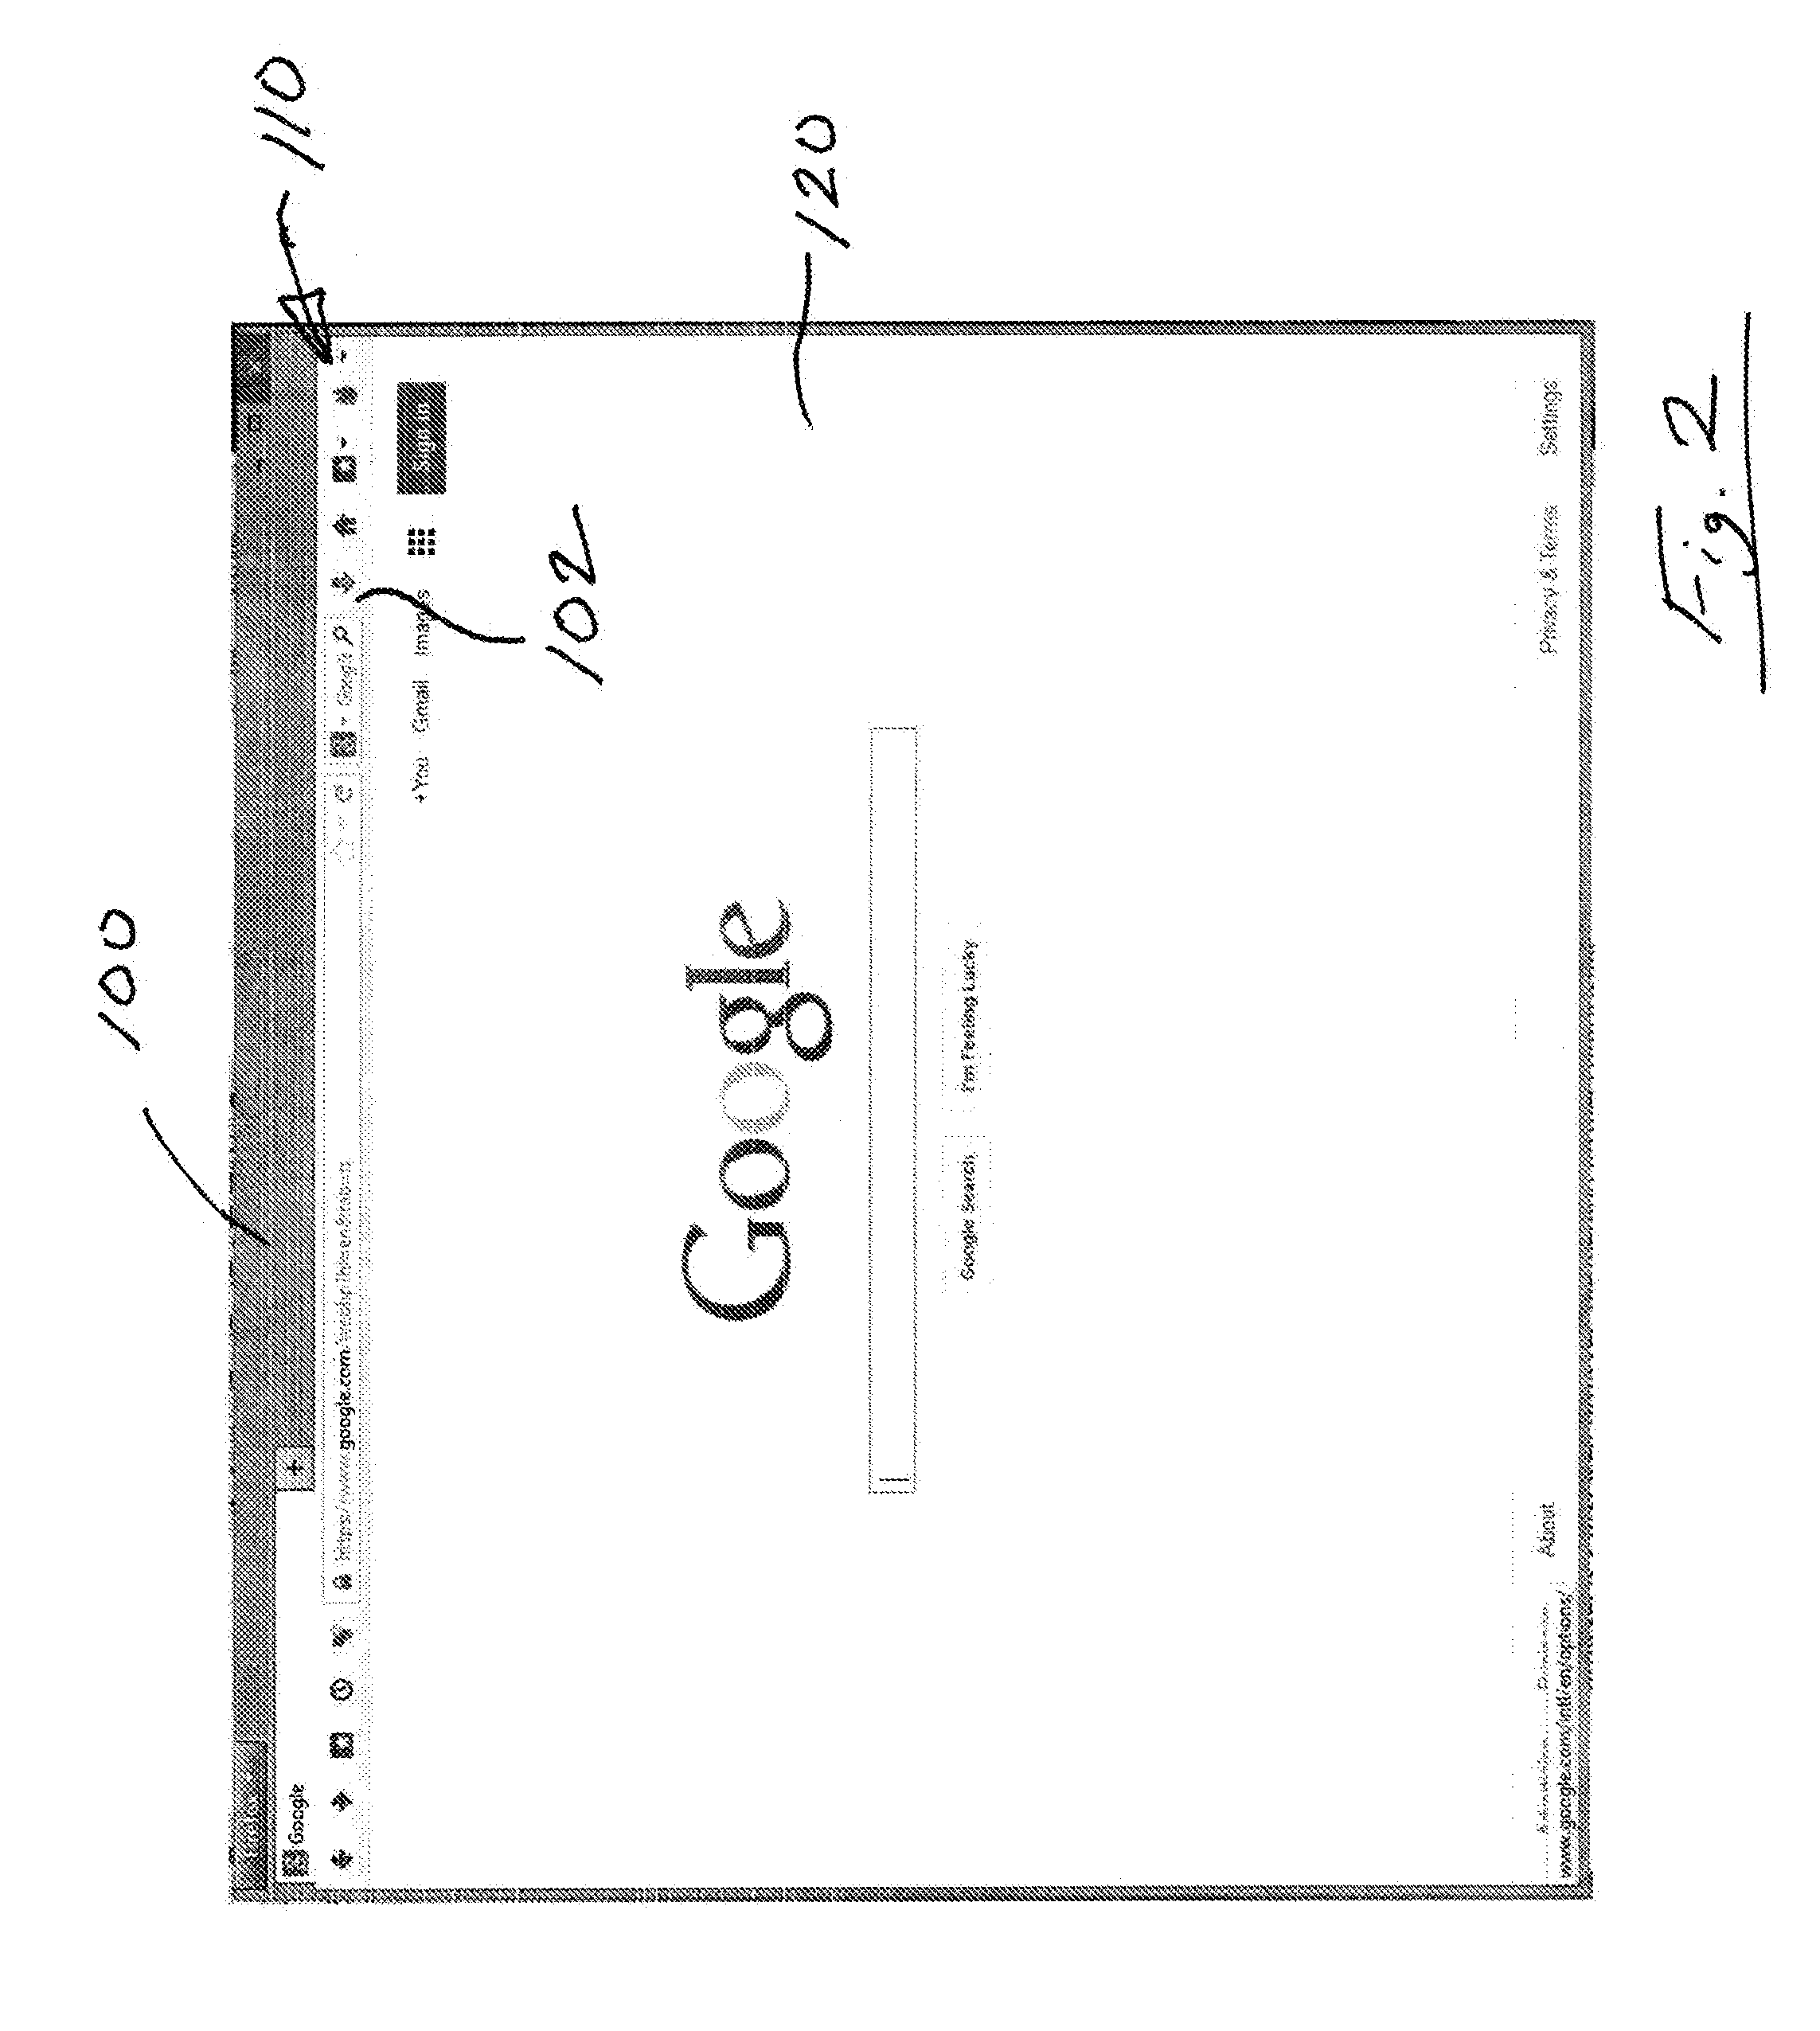 System and method for annotating webpages